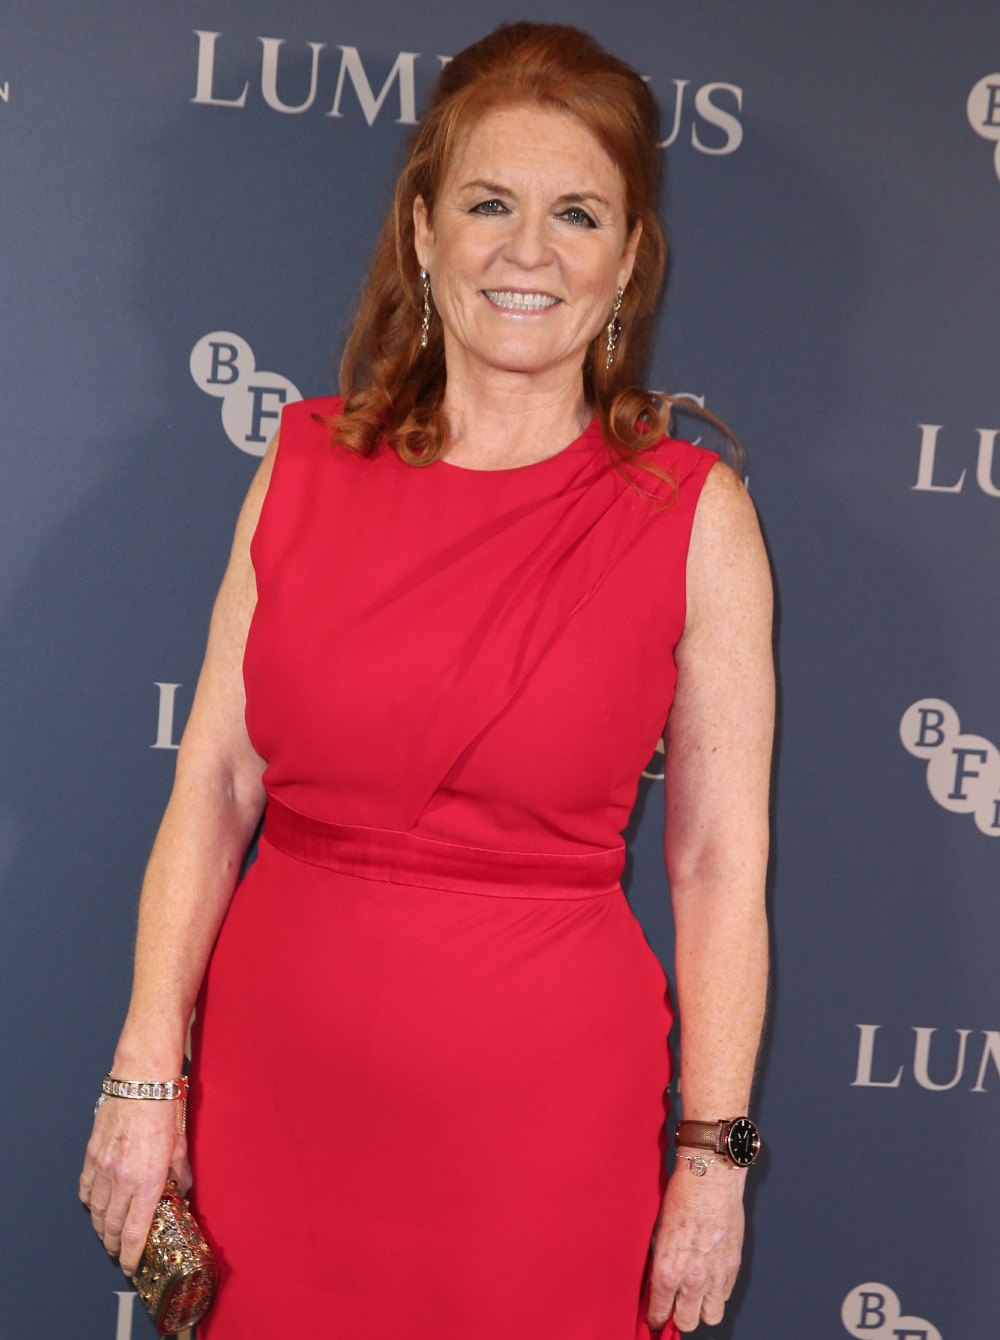 The BFI Luminous Fundraising Gala 2019 held at The Roundhouse, Camden